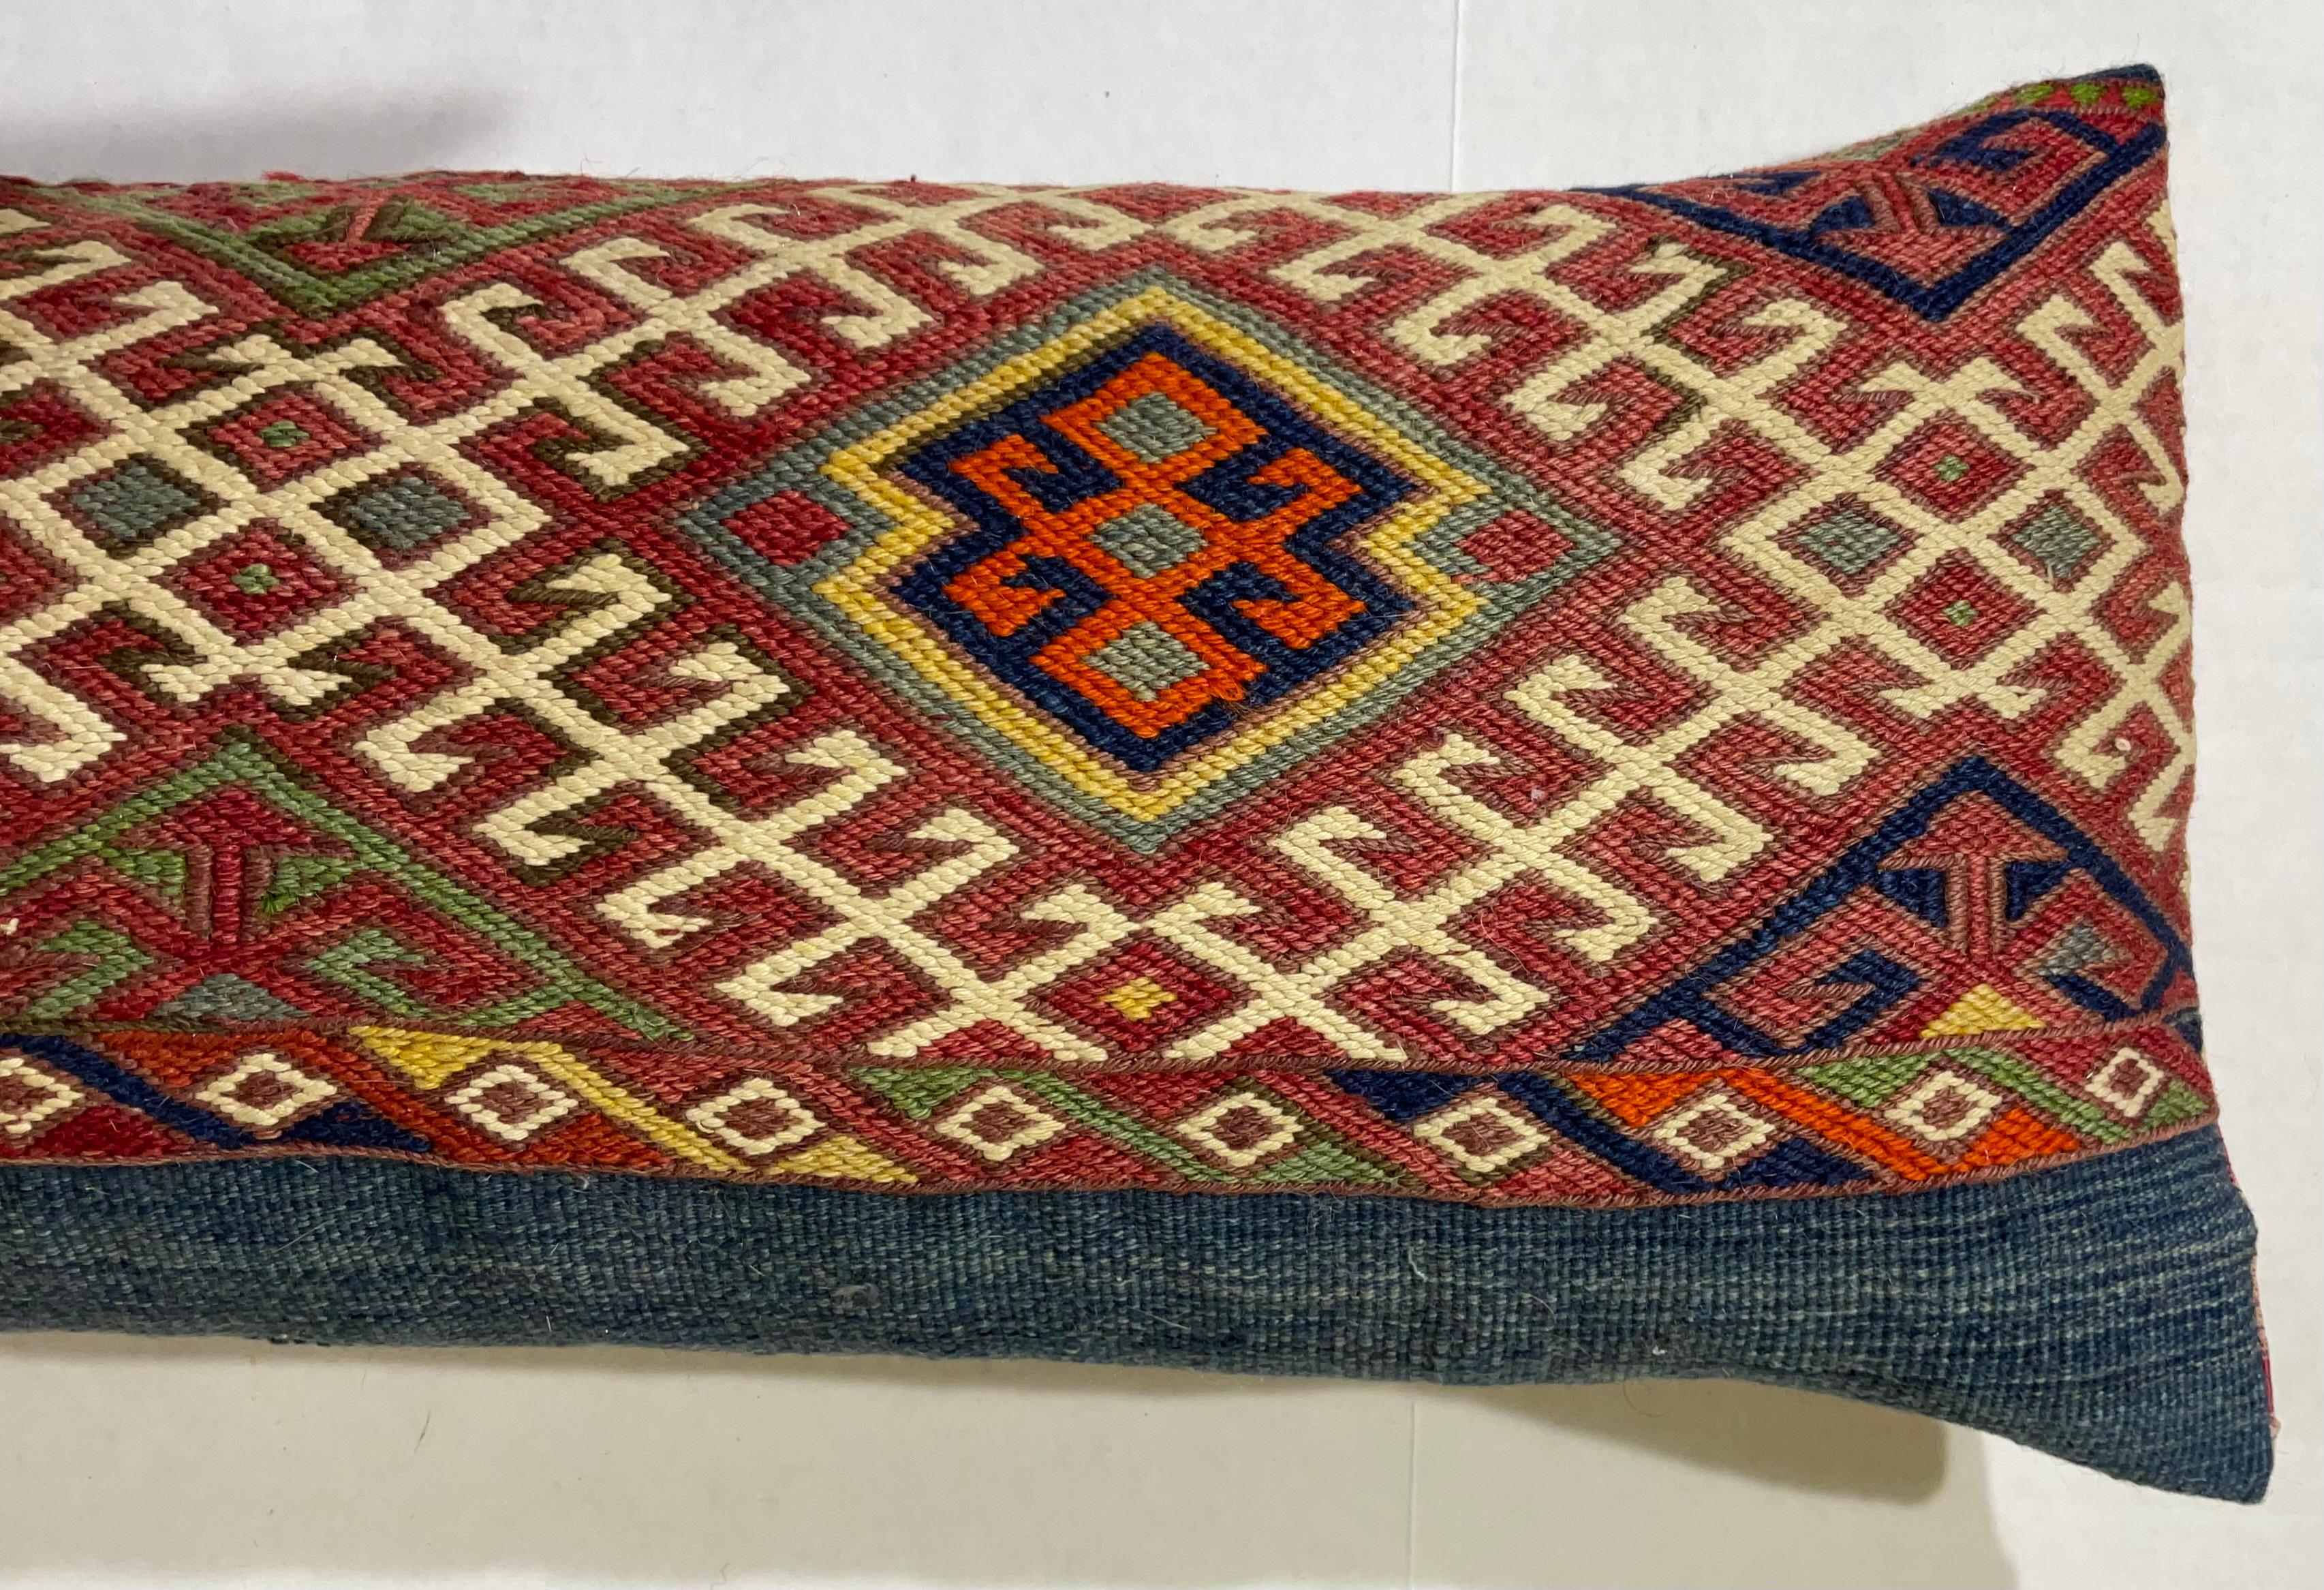 Hand-Knotted Flat-Weave Geometric Motif Kilim Rug Fragment Pillow For Sale